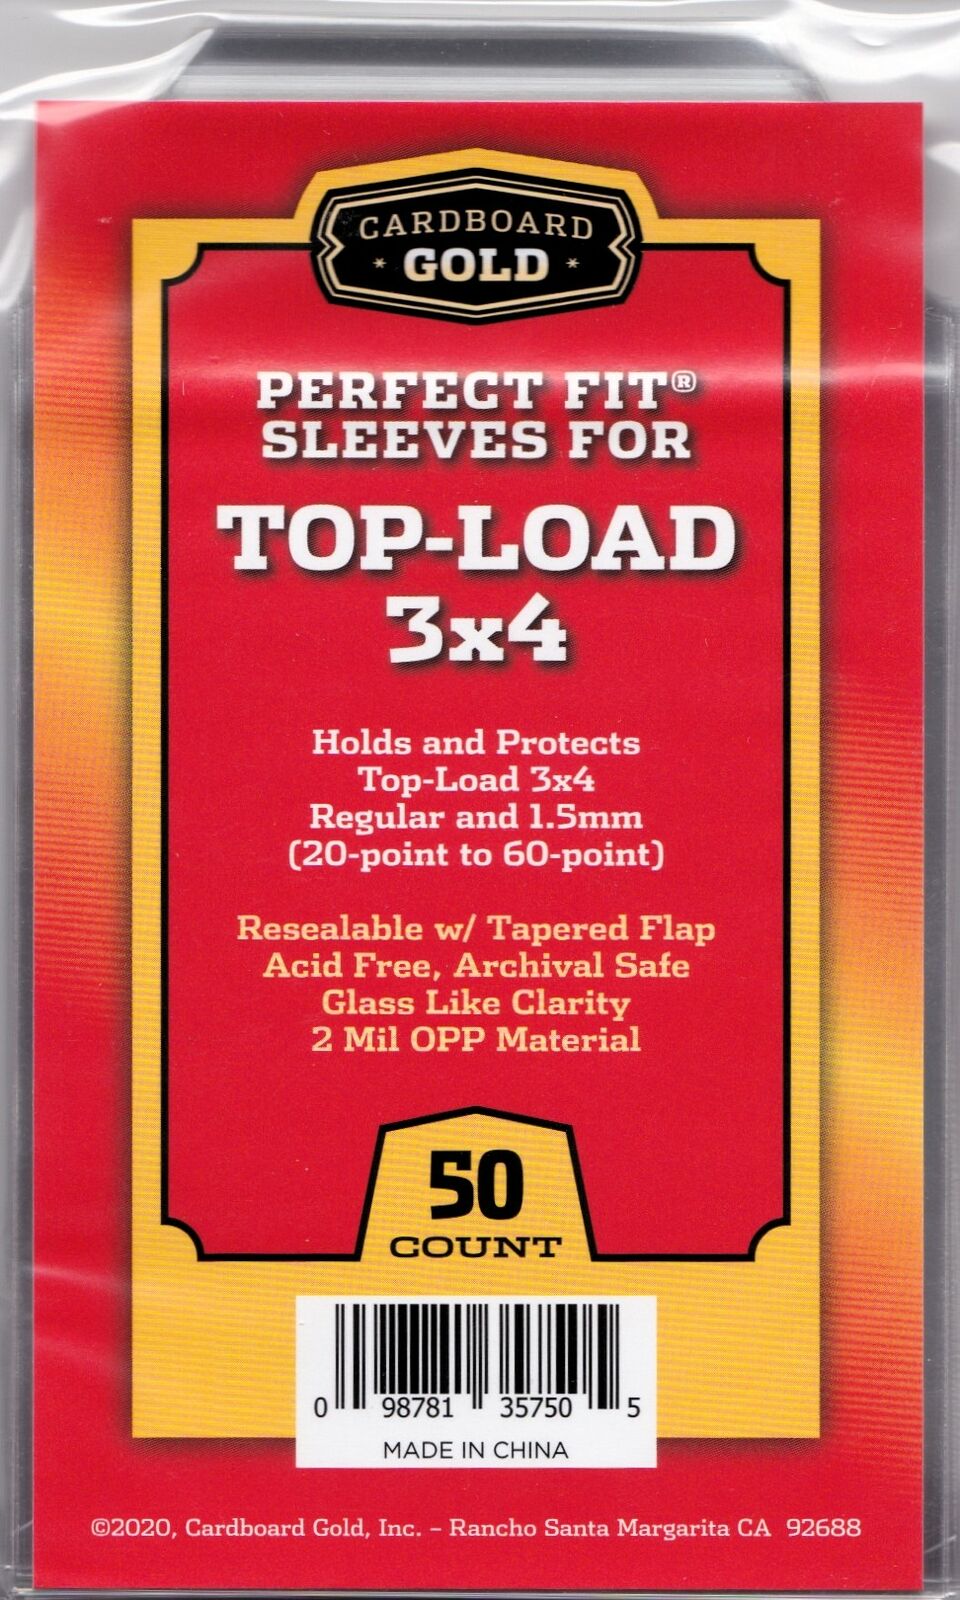 Cardboard Gold Perfect Fit Sleeves for Top-Load 3x4